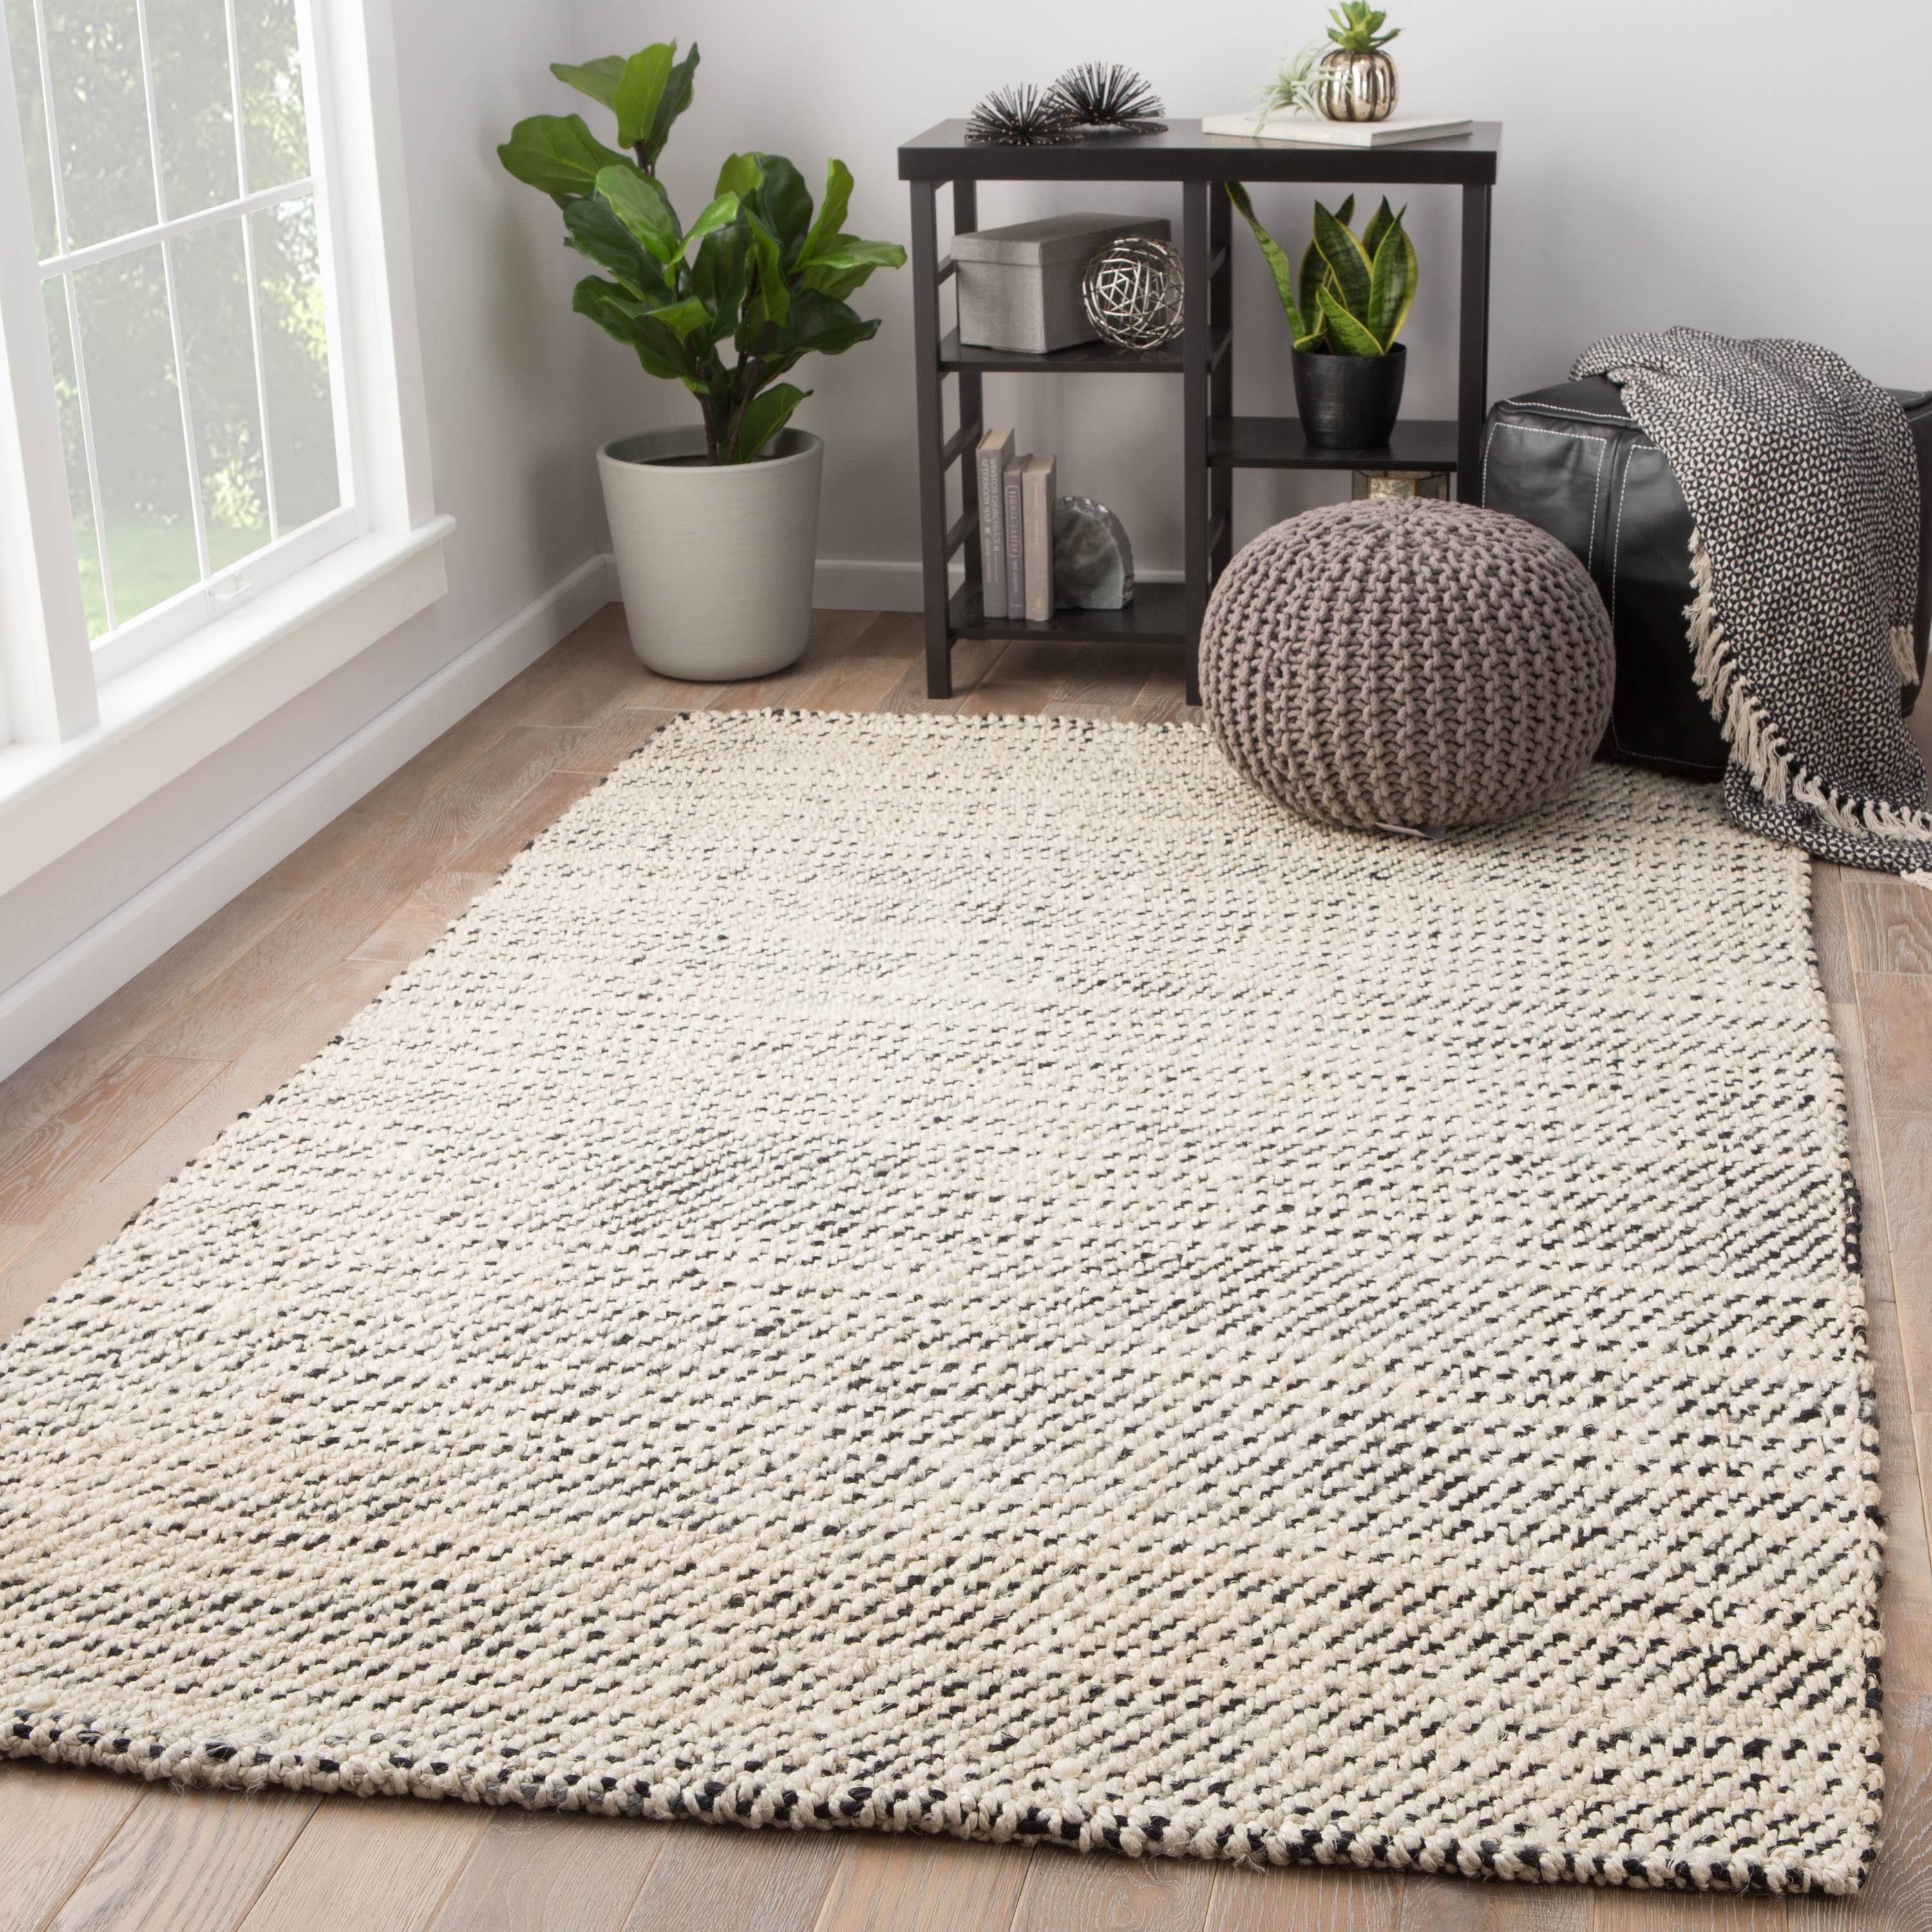 White Jute Area Rugs - Bed Bath & Beyond